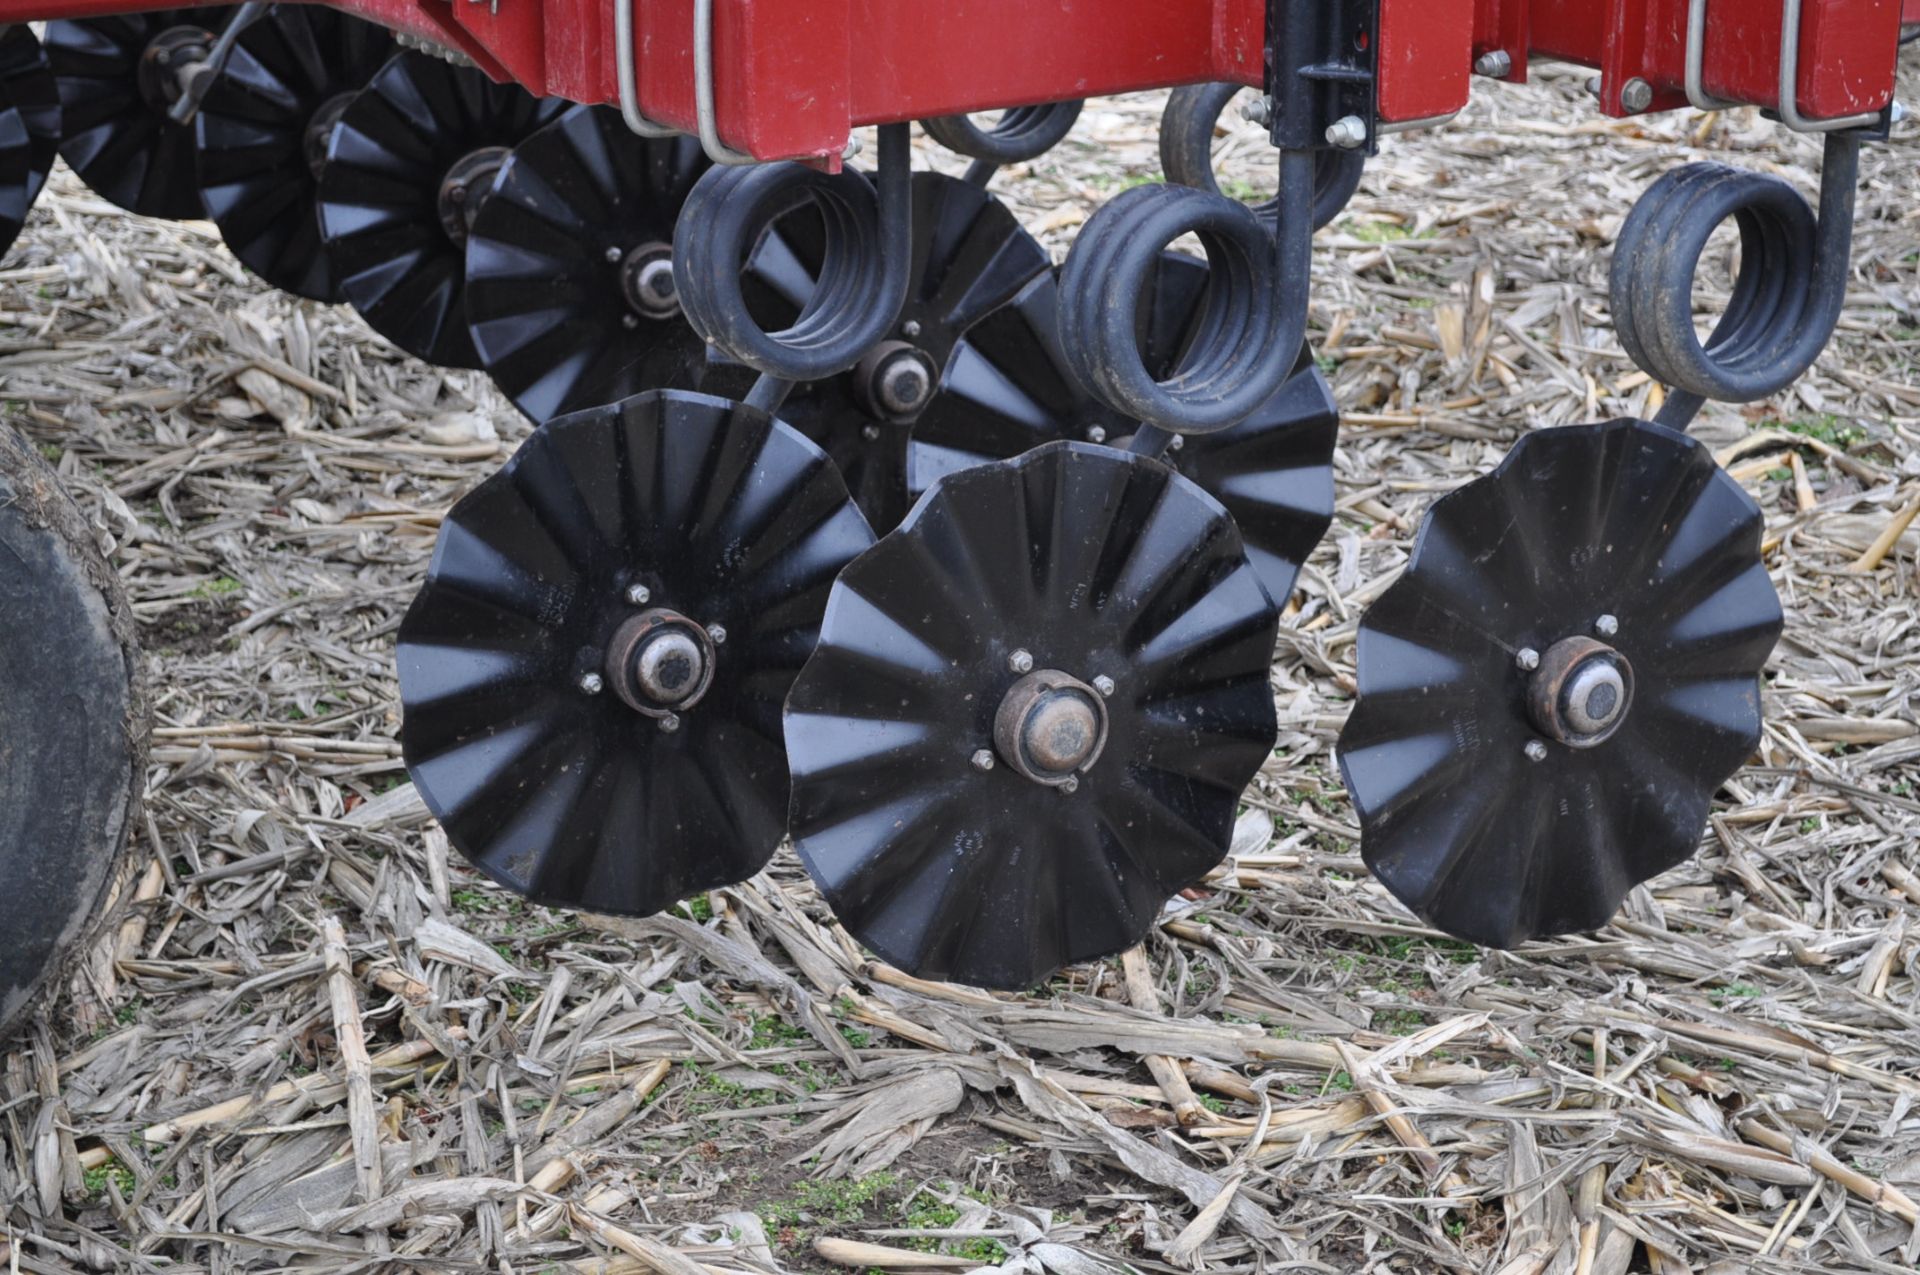 18’ Salford RTS vertical till, coil tine harrow, rolling basket, hyd fold, SN 092072ML - Image 13 of 16